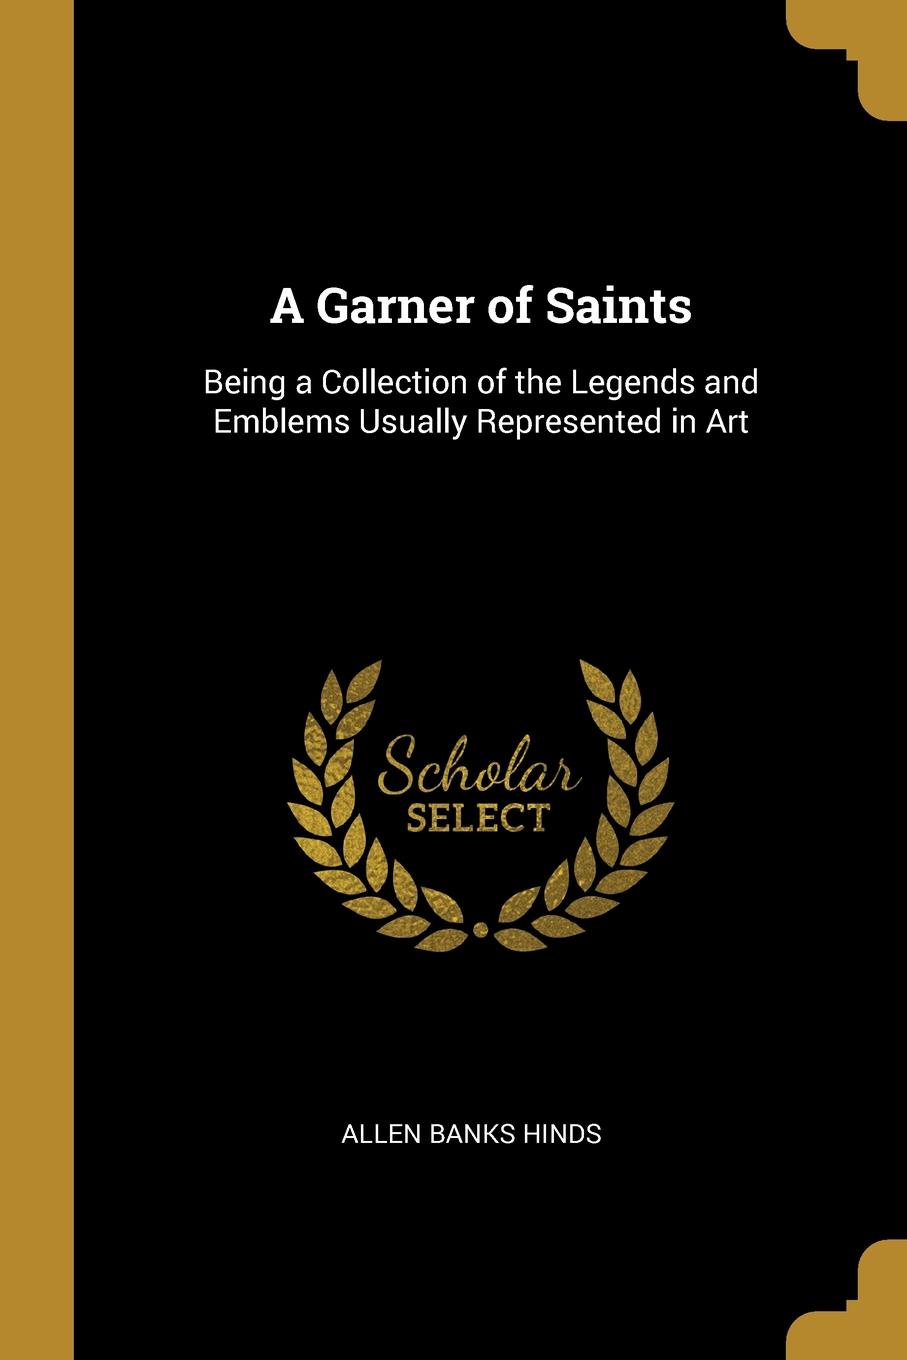 A Garner of Saints. Being a Collection of the Legends and Emblems Usually Represented in Art